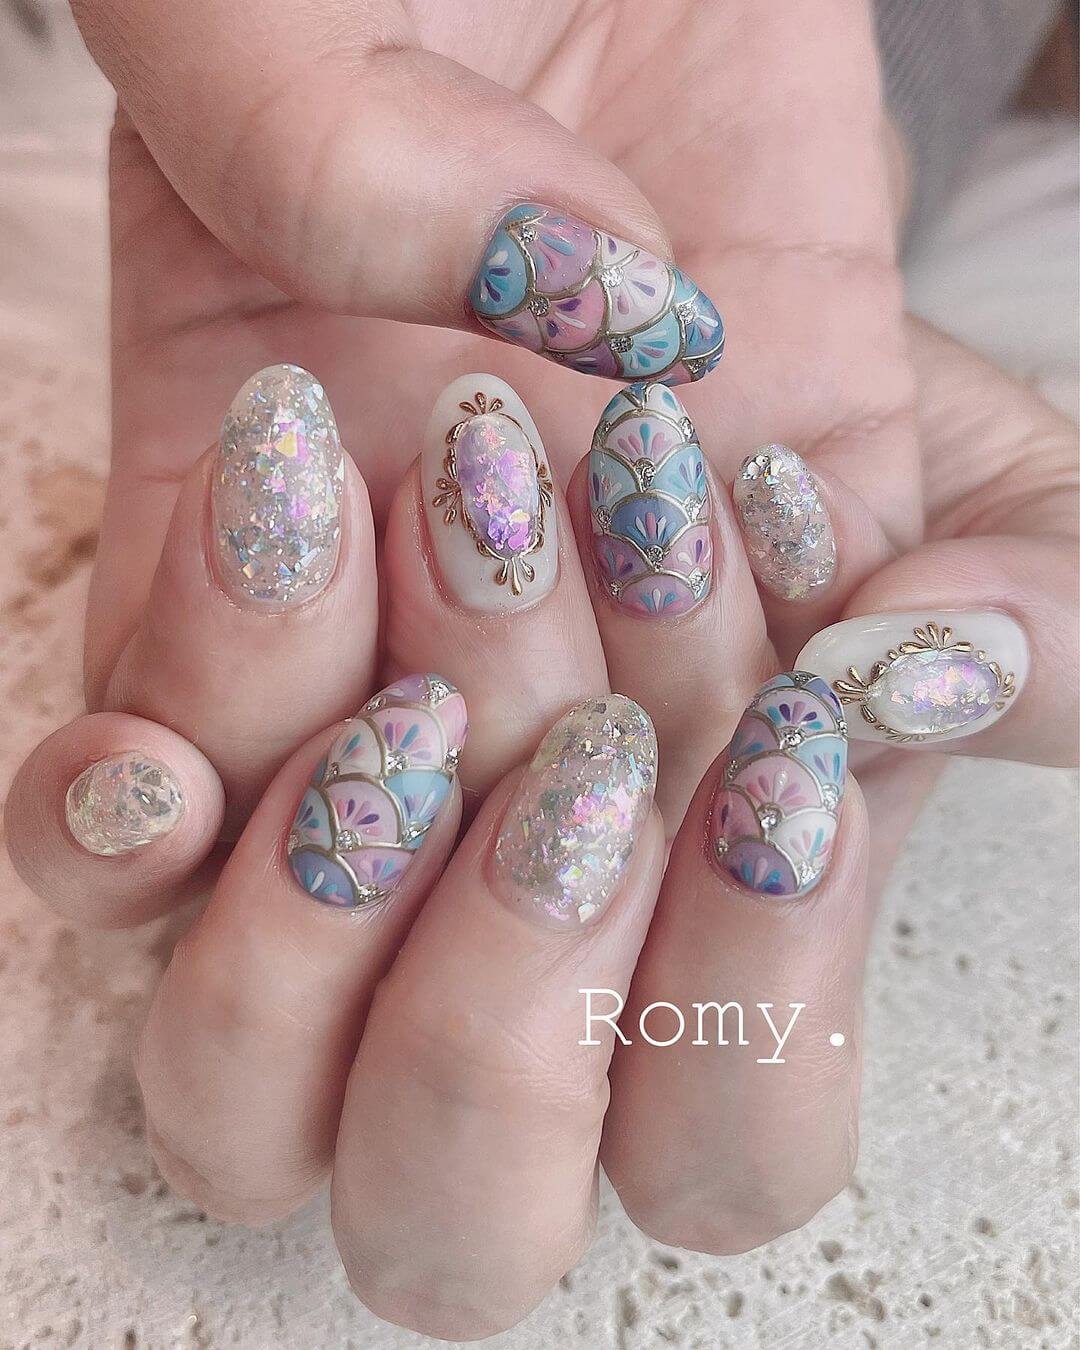 Mermaid Nail Art Designs Wrapped In Foils